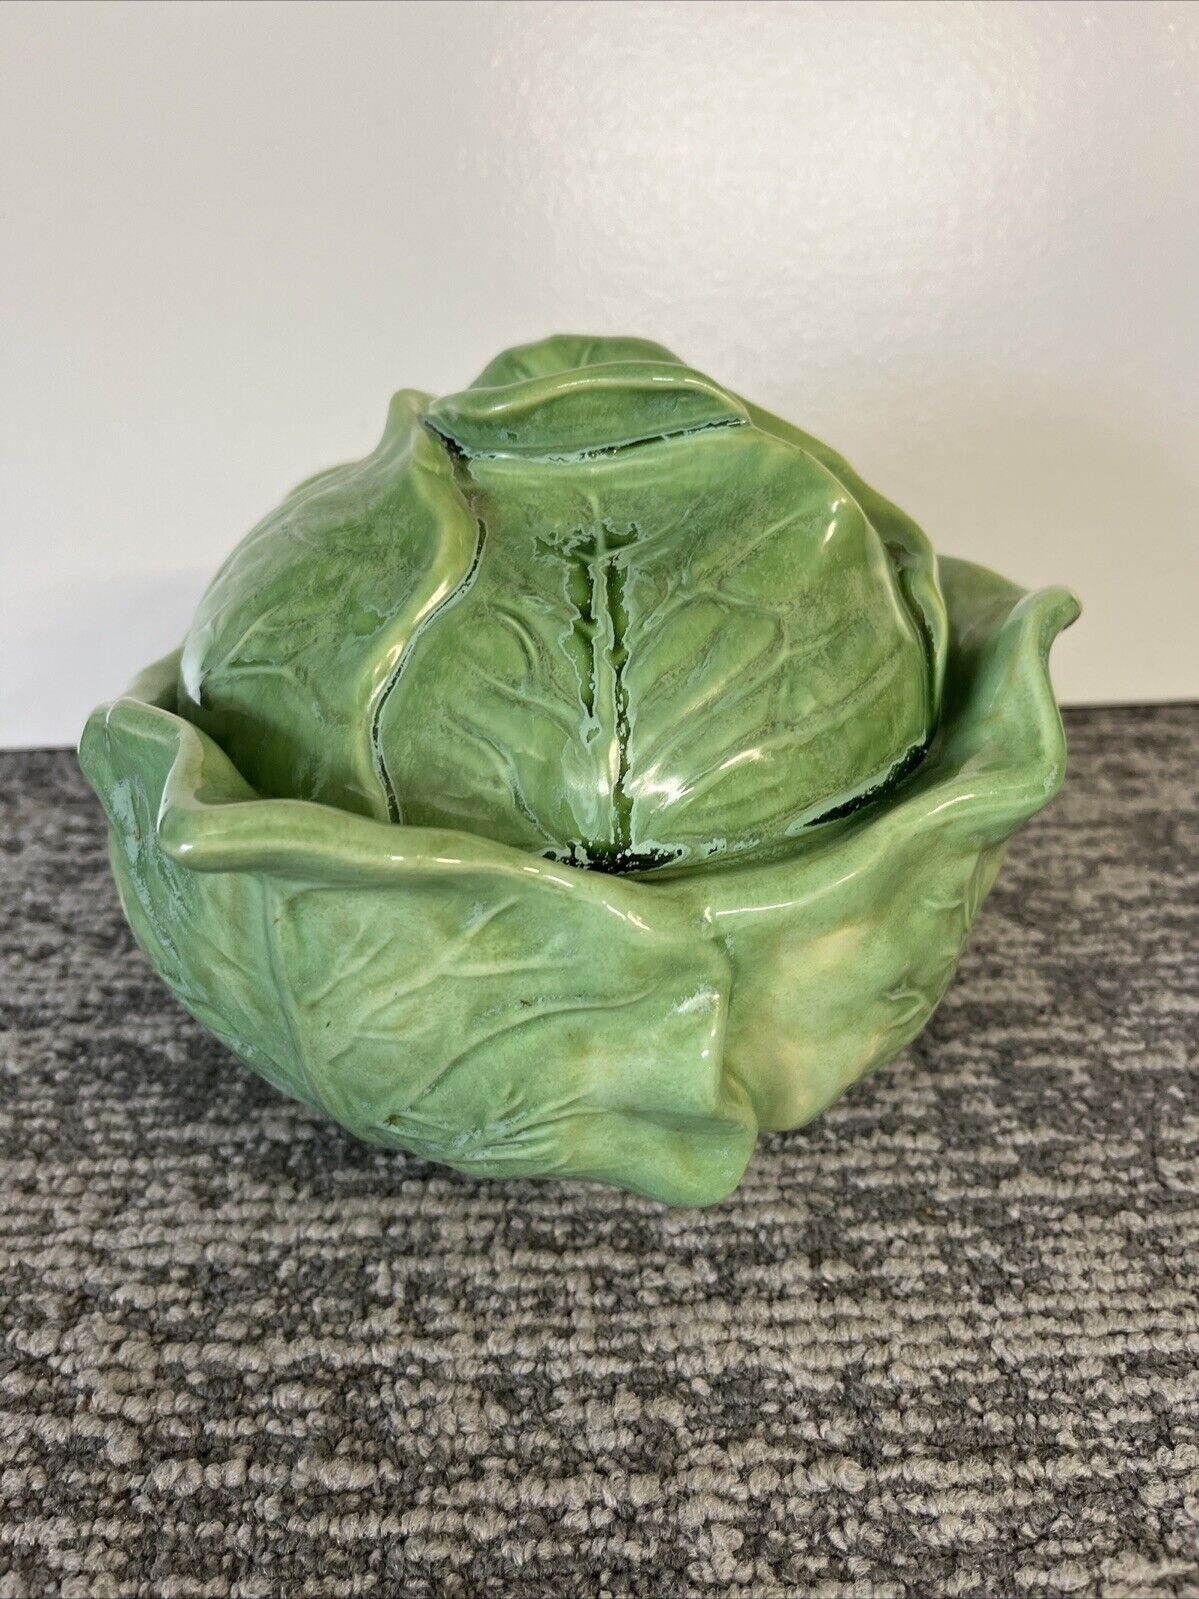 Vintage Holland Mold Covered Cabbage Bowl, 